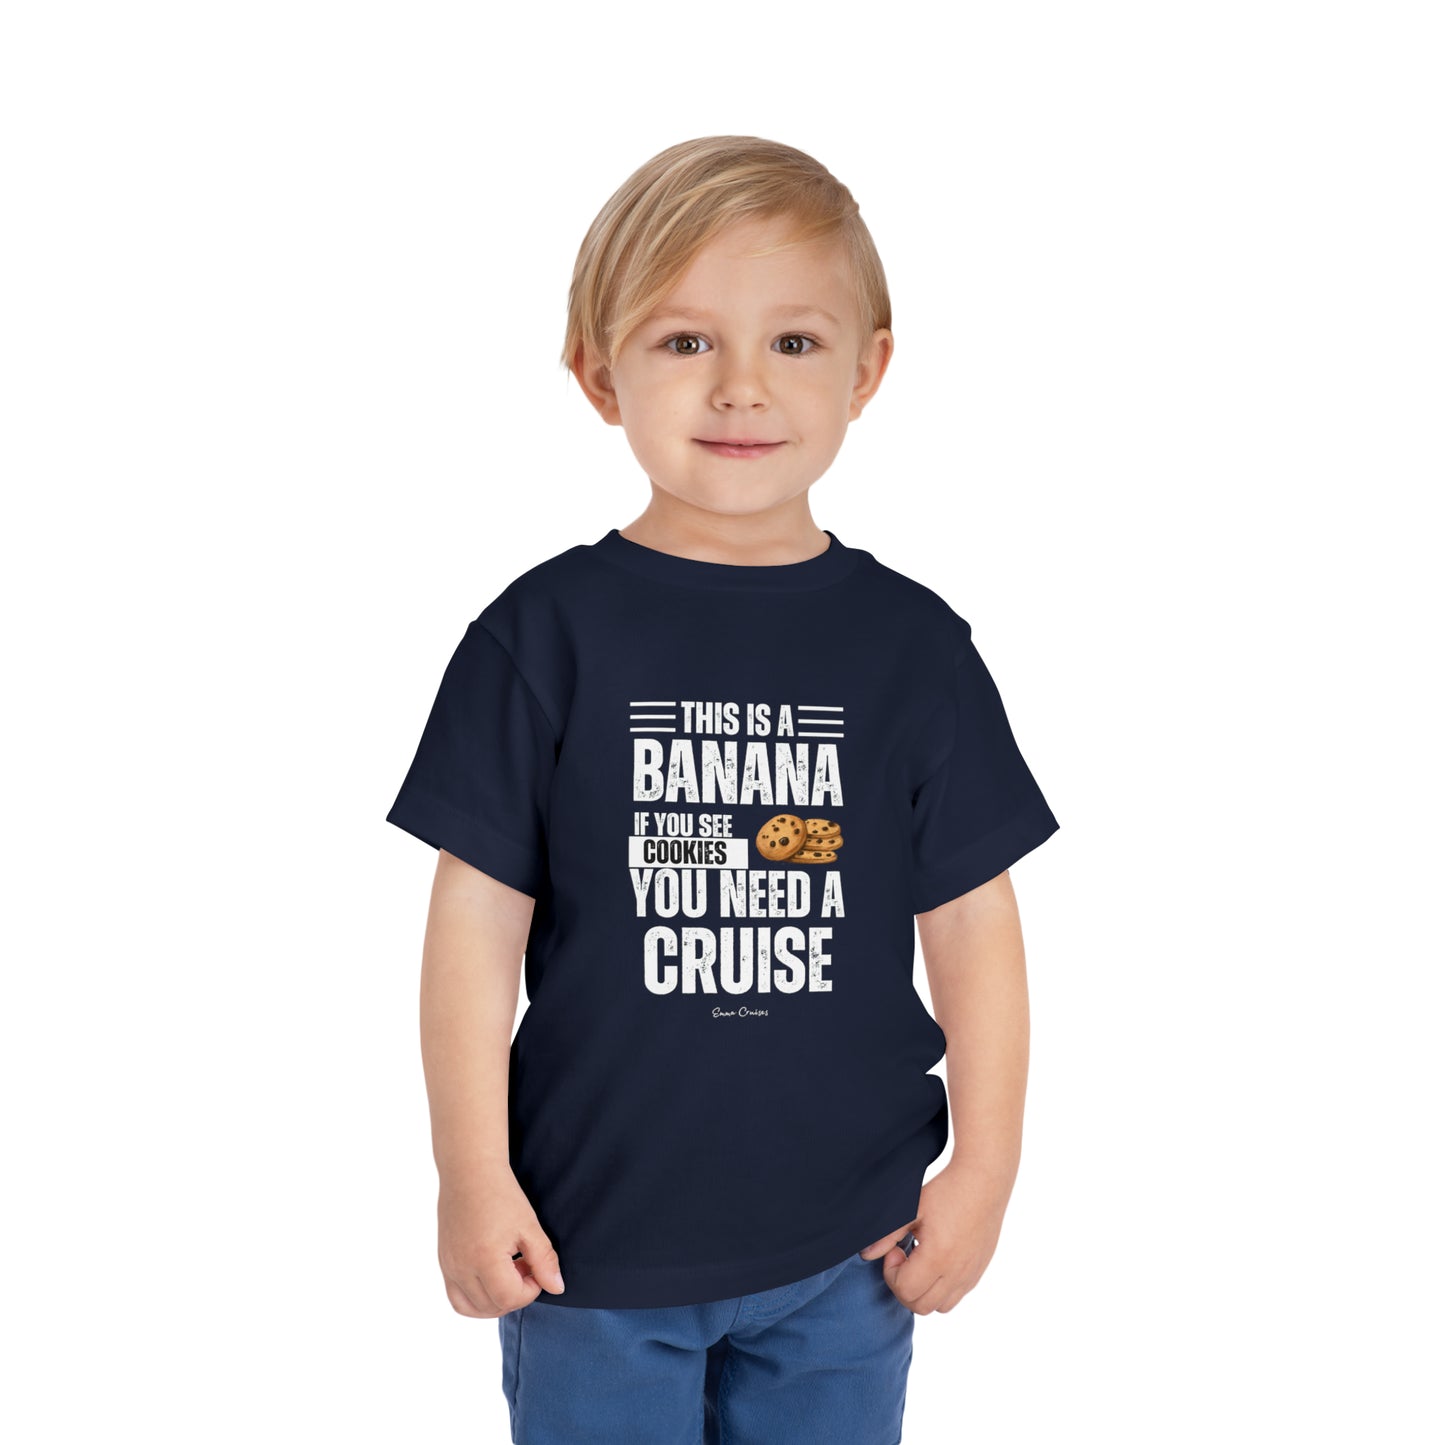 If You See a Cookie - Toddler UNISEX T-Shirt